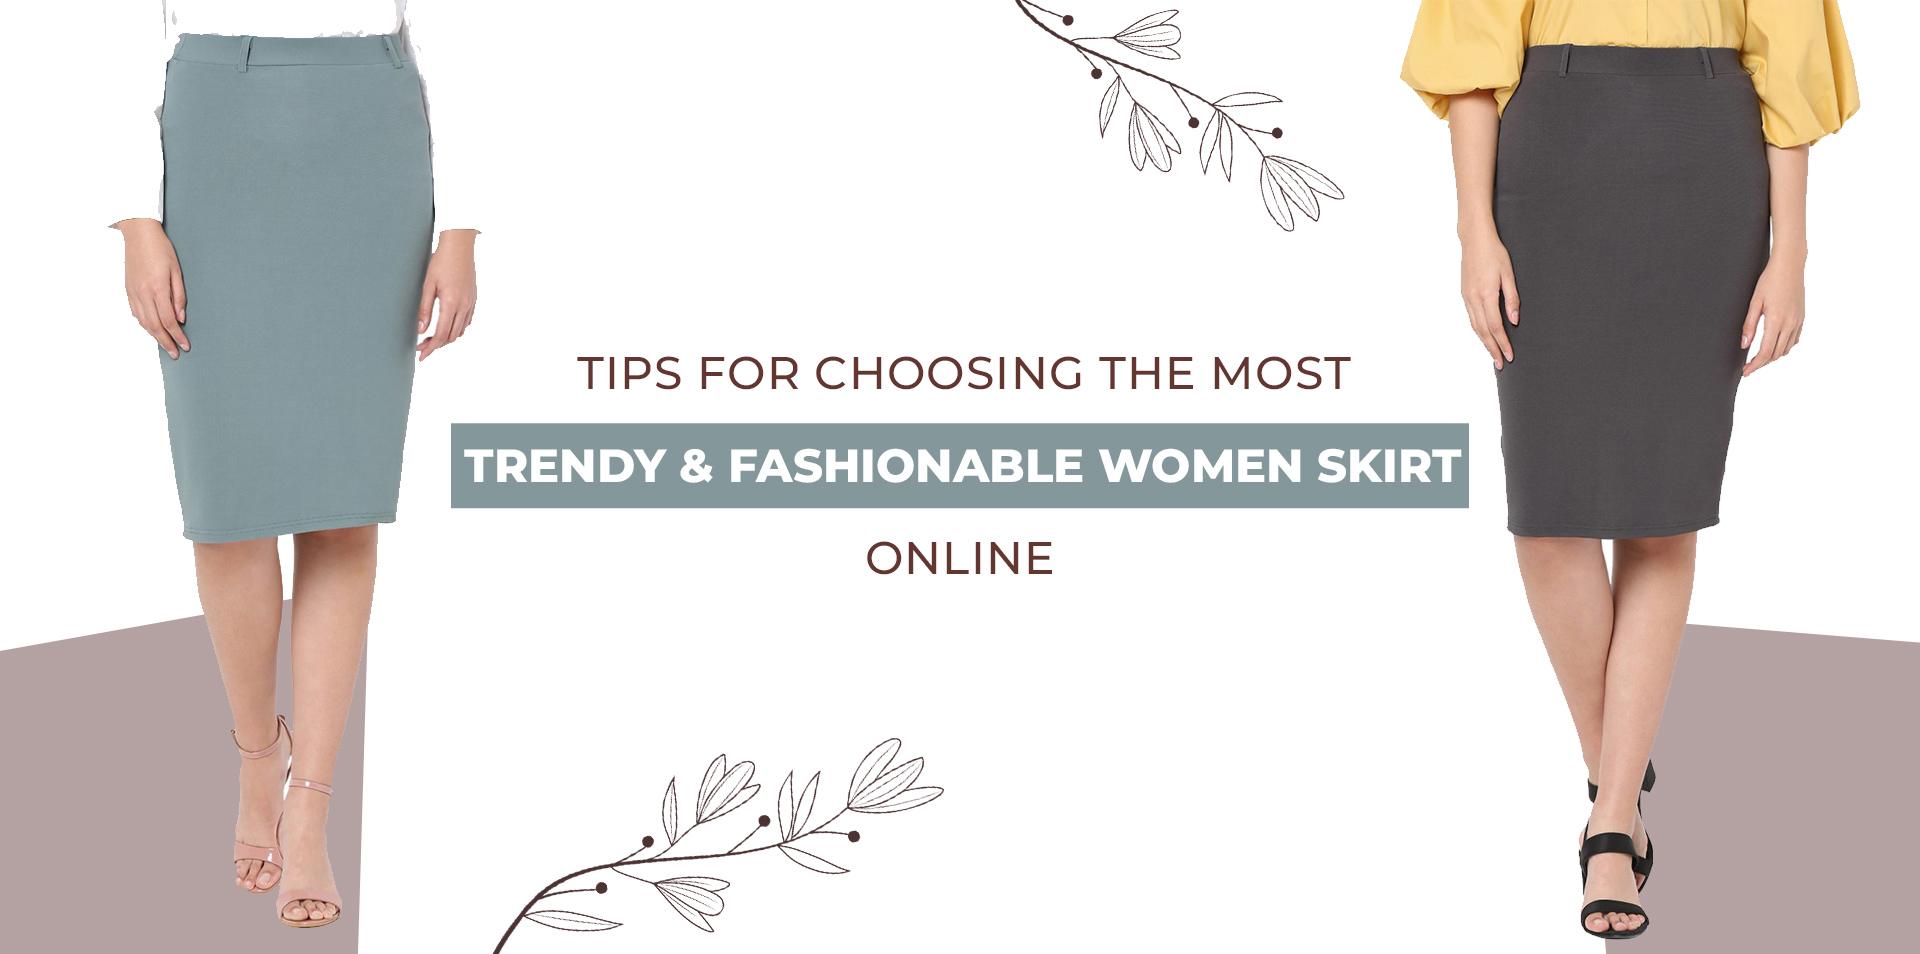 Tips for Choosing the Most Trendy & Fashionable Women's Skirts Online